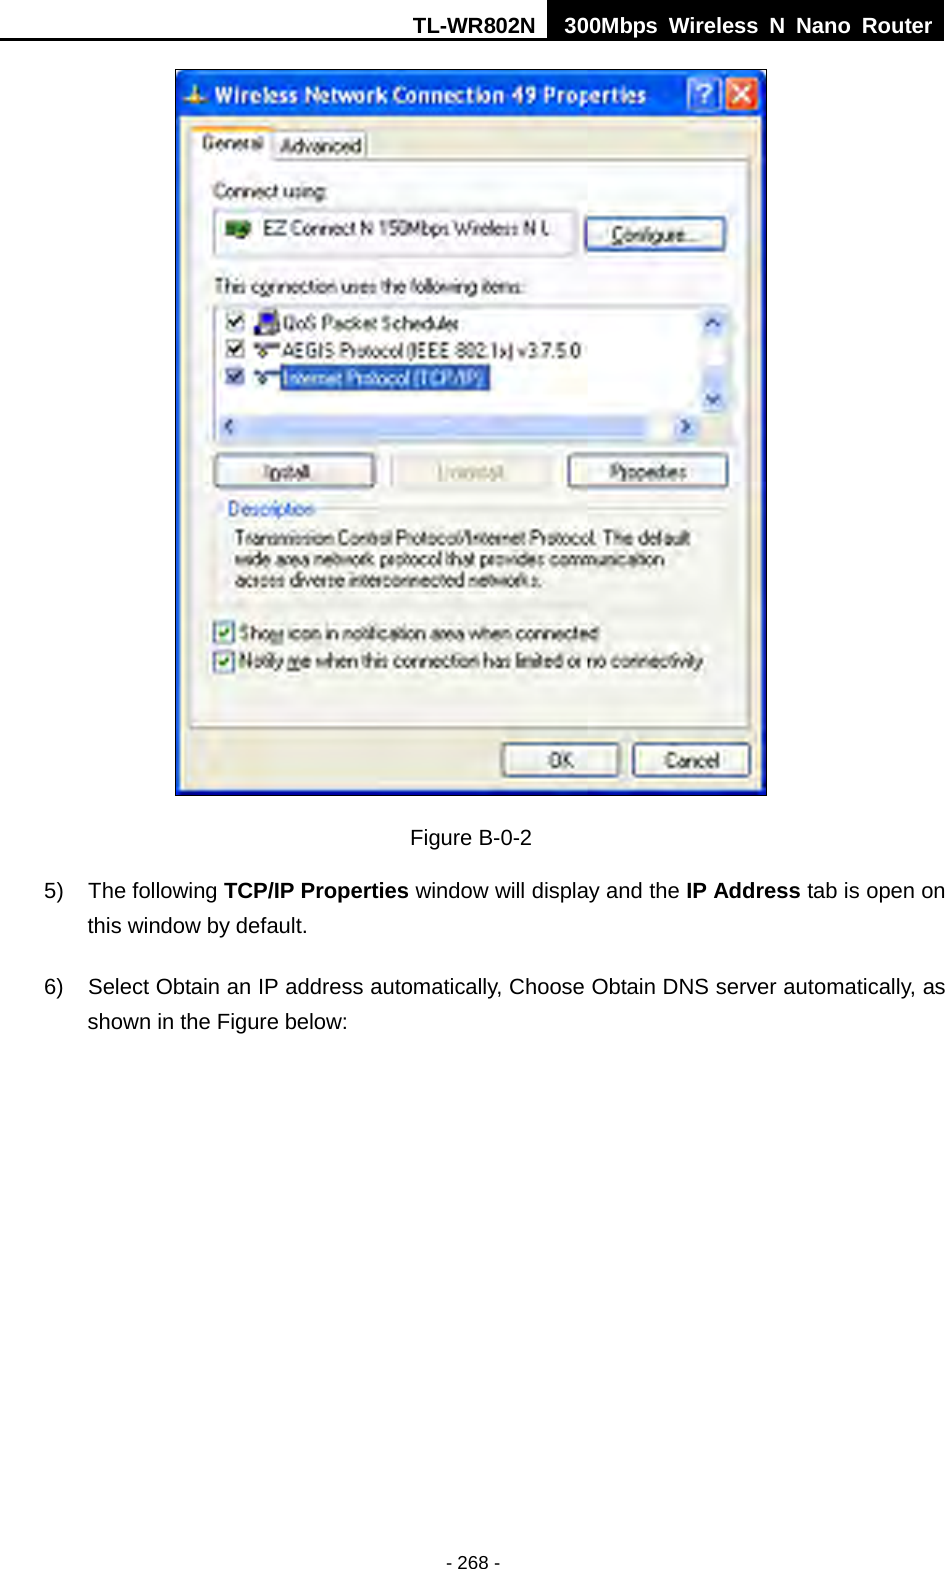 TL-WR802N  300Mbps Wireless N Nano Router   Figure B-0-2 5) The following TCP/IP Properties window will display and the IP Address tab is open on this window by default. 6) Select Obtain an IP address automatically, Choose Obtain DNS server automatically, as shown in the Figure below: - 268 - 